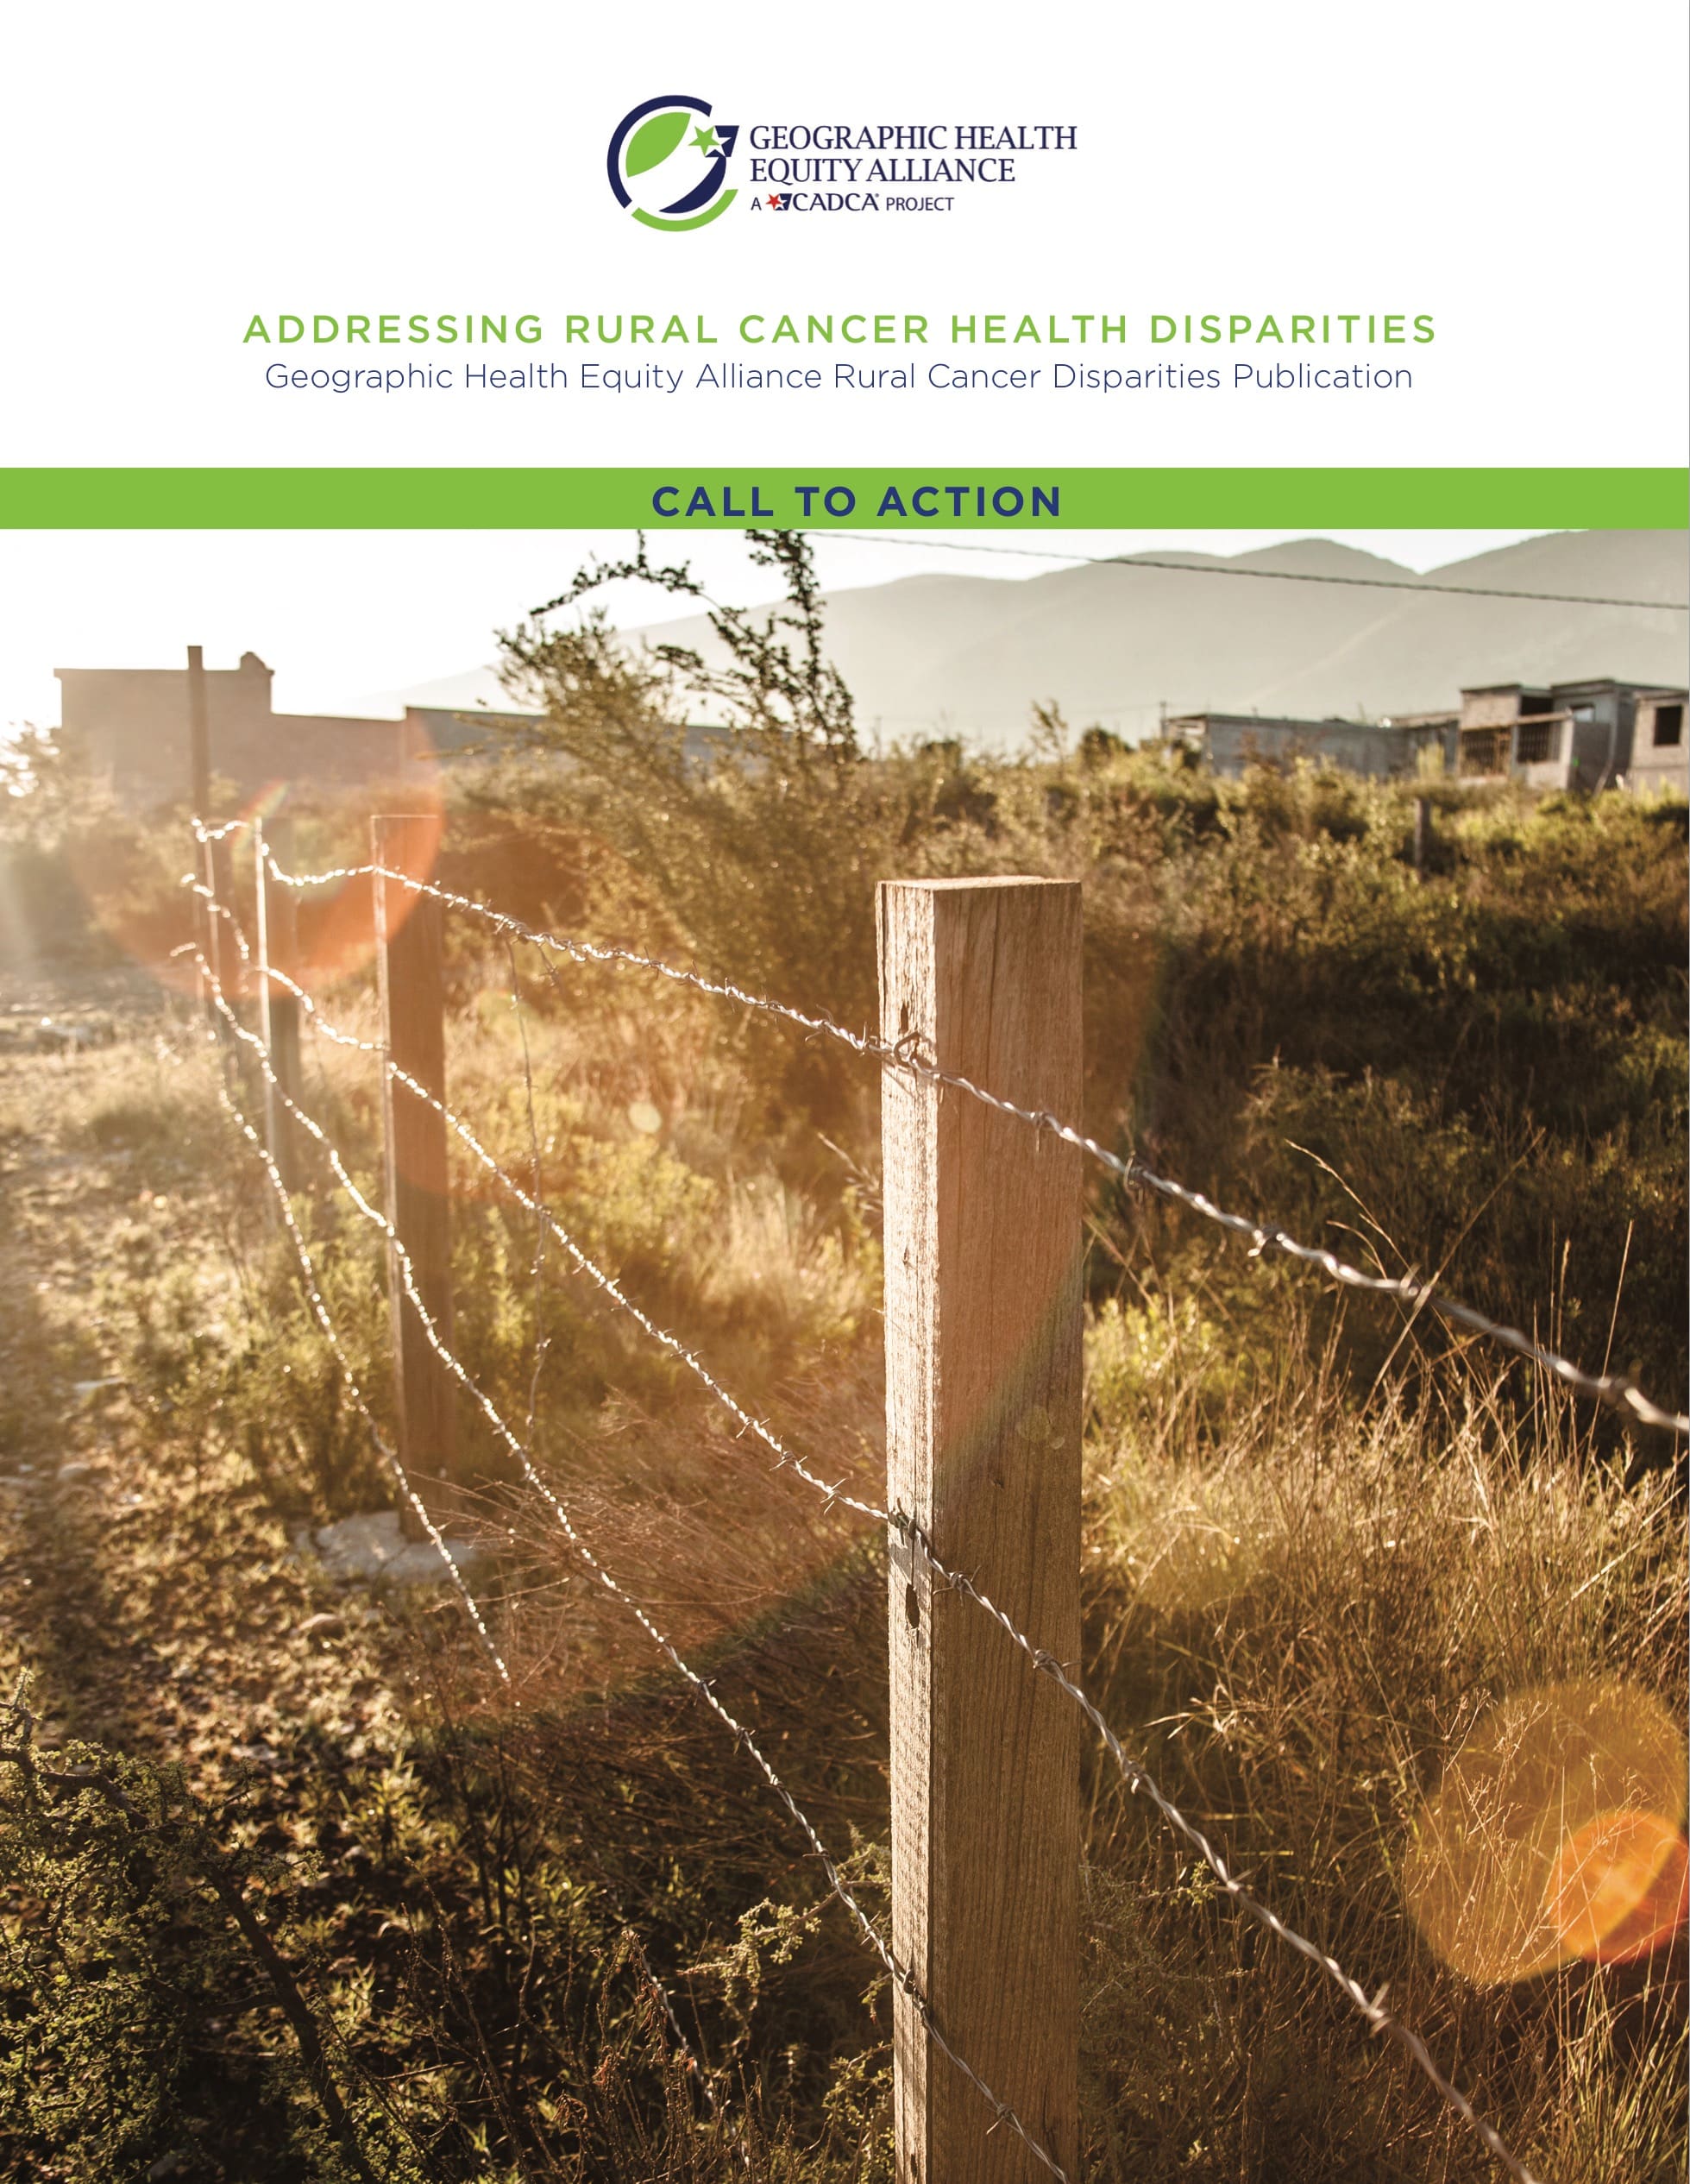 Addressing Rural Cancer Health Disparities – A Geographic Health Equity Alliance Publication